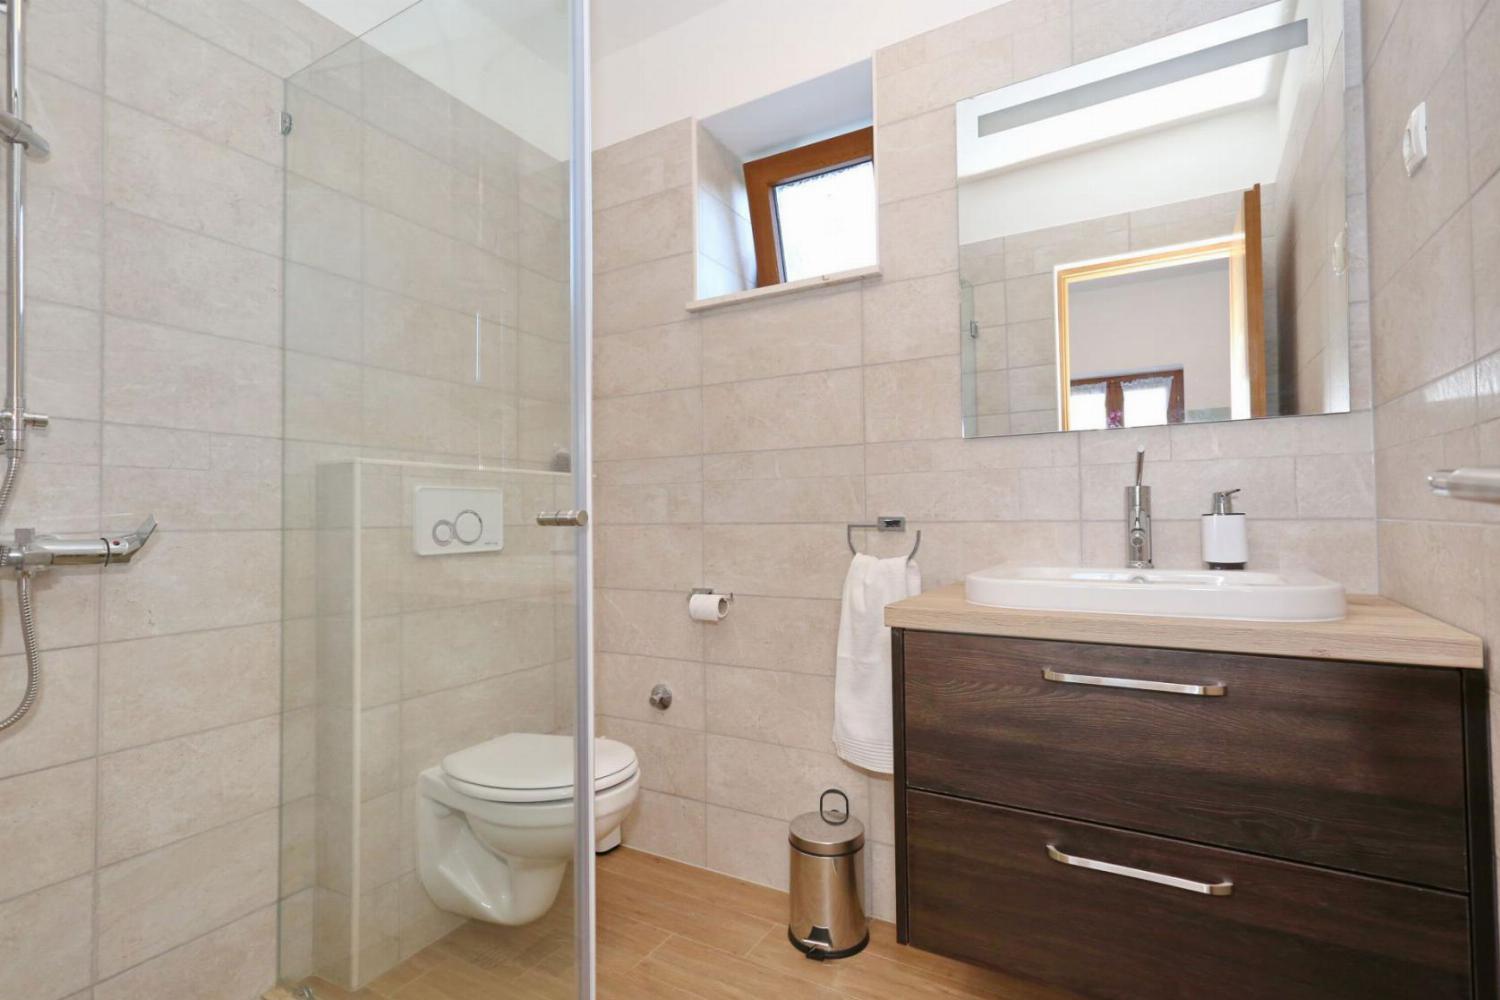 En suite bathroom with shower and WC